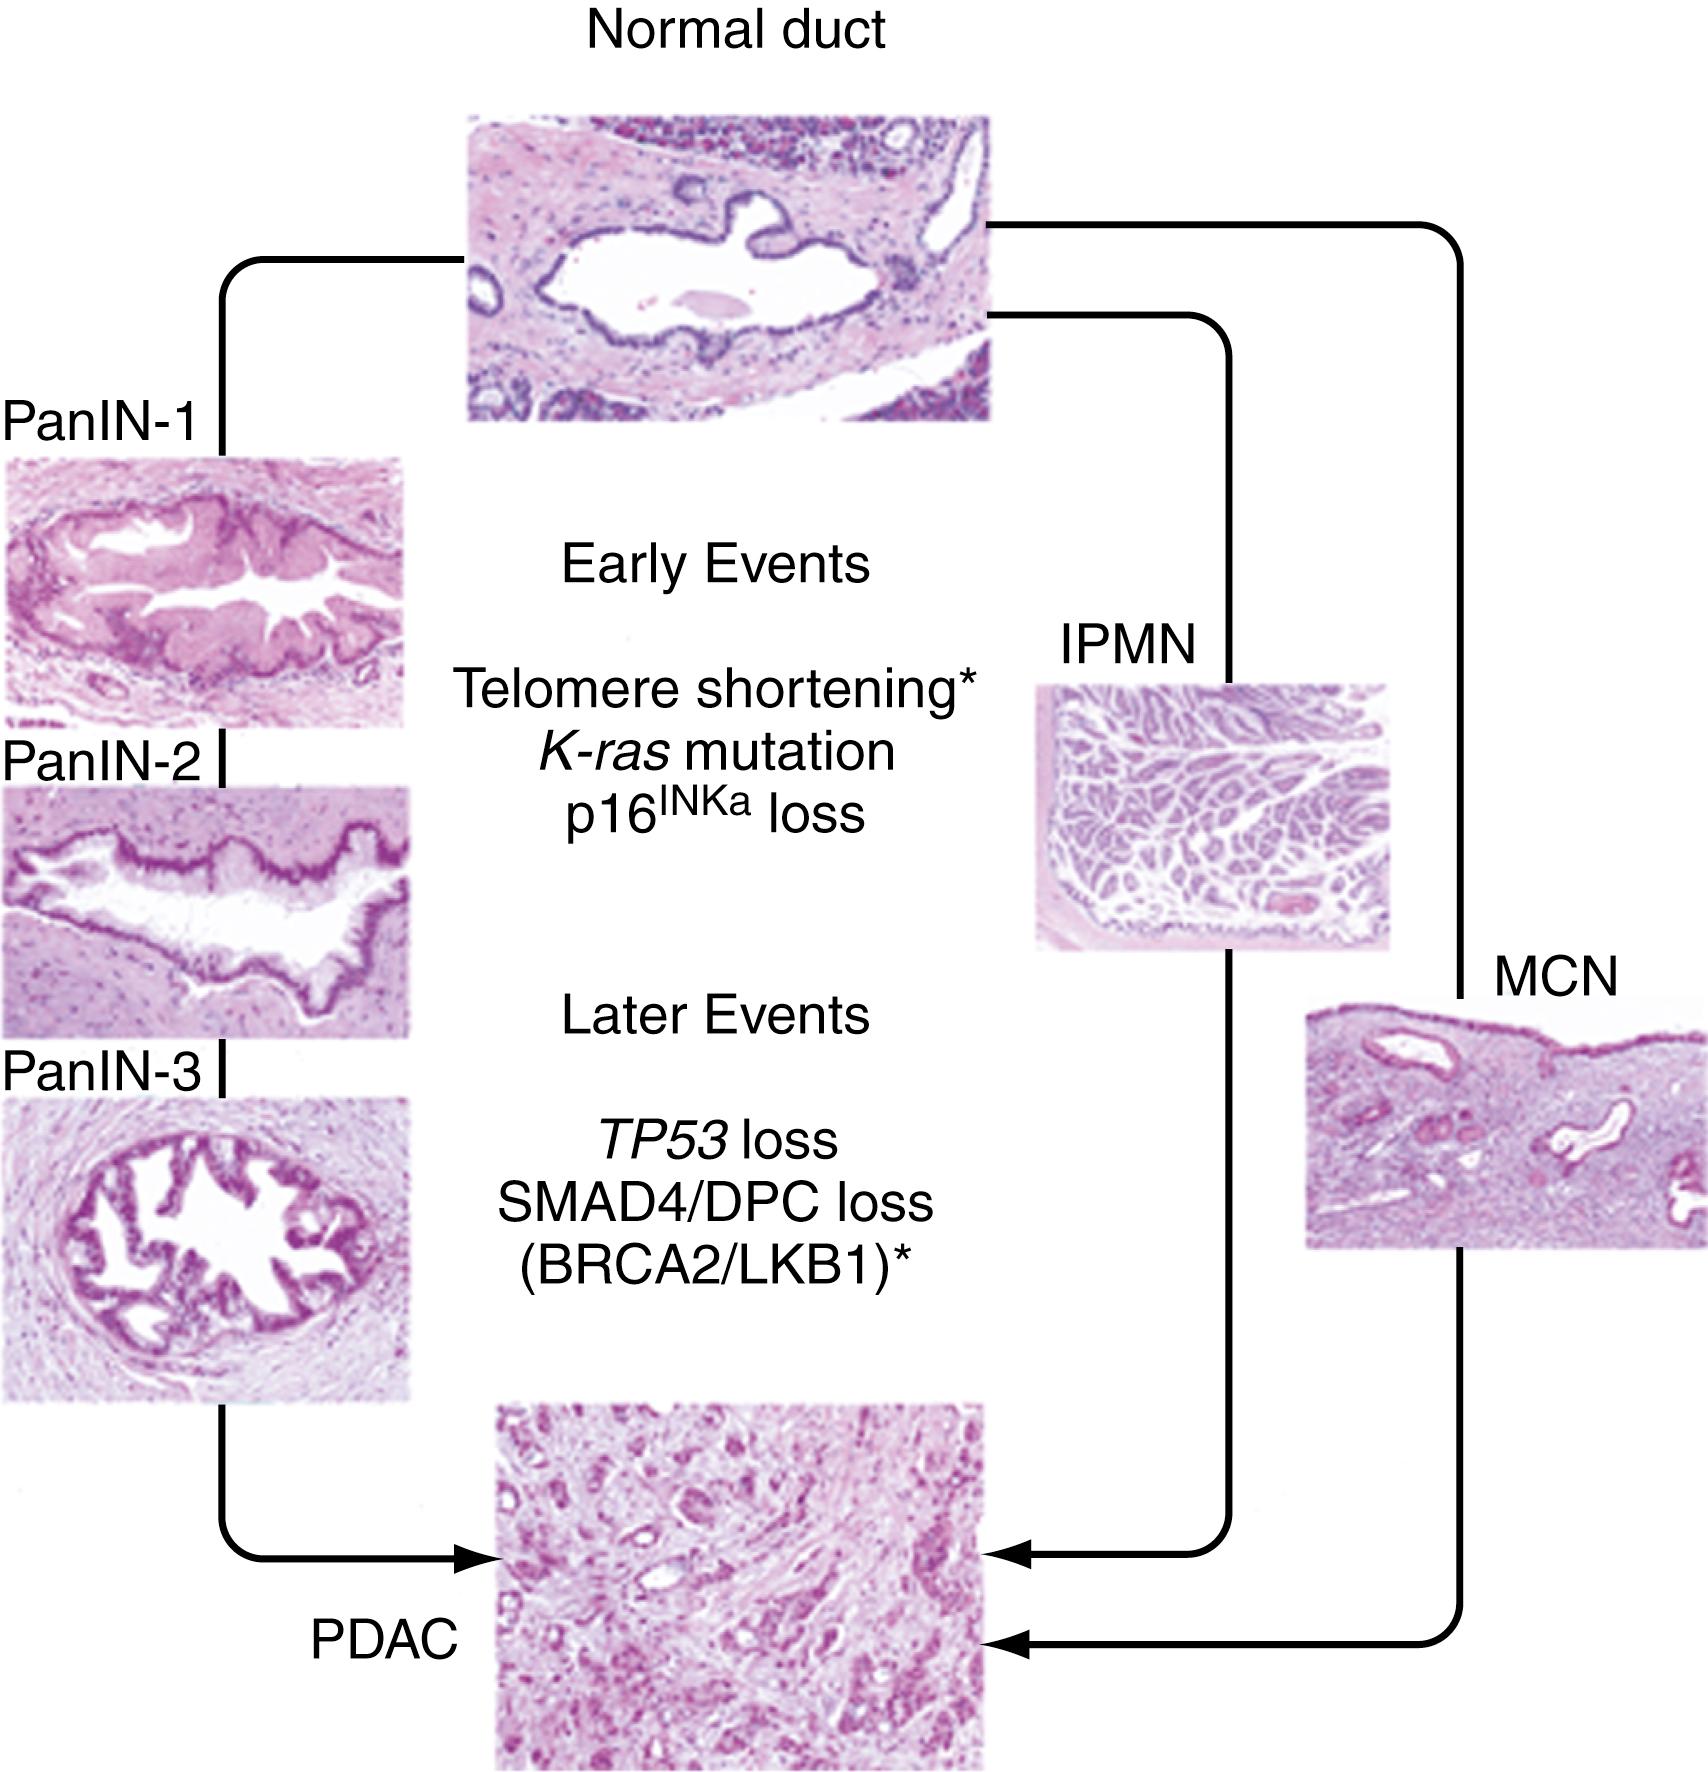 Fig. 60.2, Pancreatic precursor lesions and genetic events involved in pancreatic progression to adenocarcinoma. Pictured are 3 known human pancreatic ductal adenocarcinoma (PDAC) precursor lesions: PanIN, MCN, and IPMN. The PanIN grading scheme is shown on the left ; increasing grades (1 through 3) reflect increasing atypia, eventually leading to frank PDAC. The right side illustrates the potential progression of MCN and IPMN to PDAC. The genetic alterations documented in pancreatic adenocarcinomas also occur in PanIN, and to a lesser extent in MCN and IPMN, in an apparent temporal sequence, although these alterations have not been correlated with the acquisition of specific histopathologic features. The various genetic events are listed and divided into those that occur predominantly early or late in PDAC progression. Asterisks indicate events that are not common to all precursor lesions (e.g., telomere shortening and BRCA2 loss are documented in PanIN, and LKB1 loss is documented in a subset of PDACs and IPMNs). IPMN , intraductal papillary mucinous neoplasm; MCN , mucinous cystic neoplasm; PanIN , pancreatic intraepithelial neoplasia.